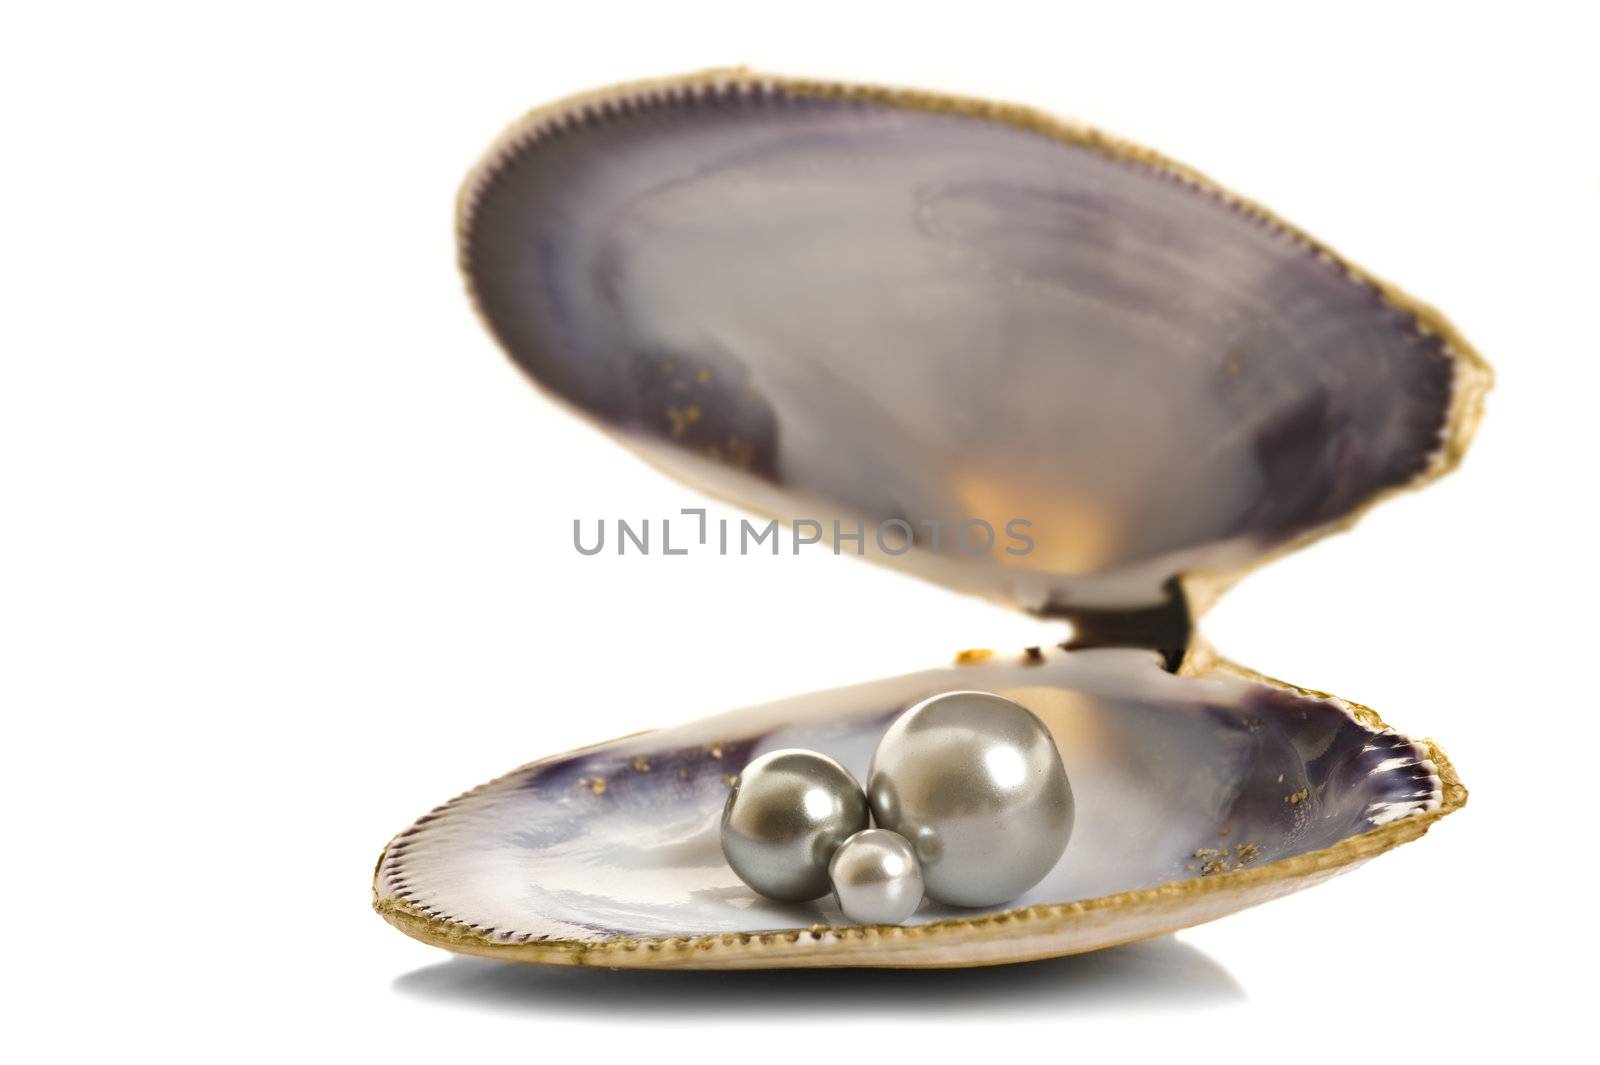 Beautiful pearls in a shell on pure white background by tish1